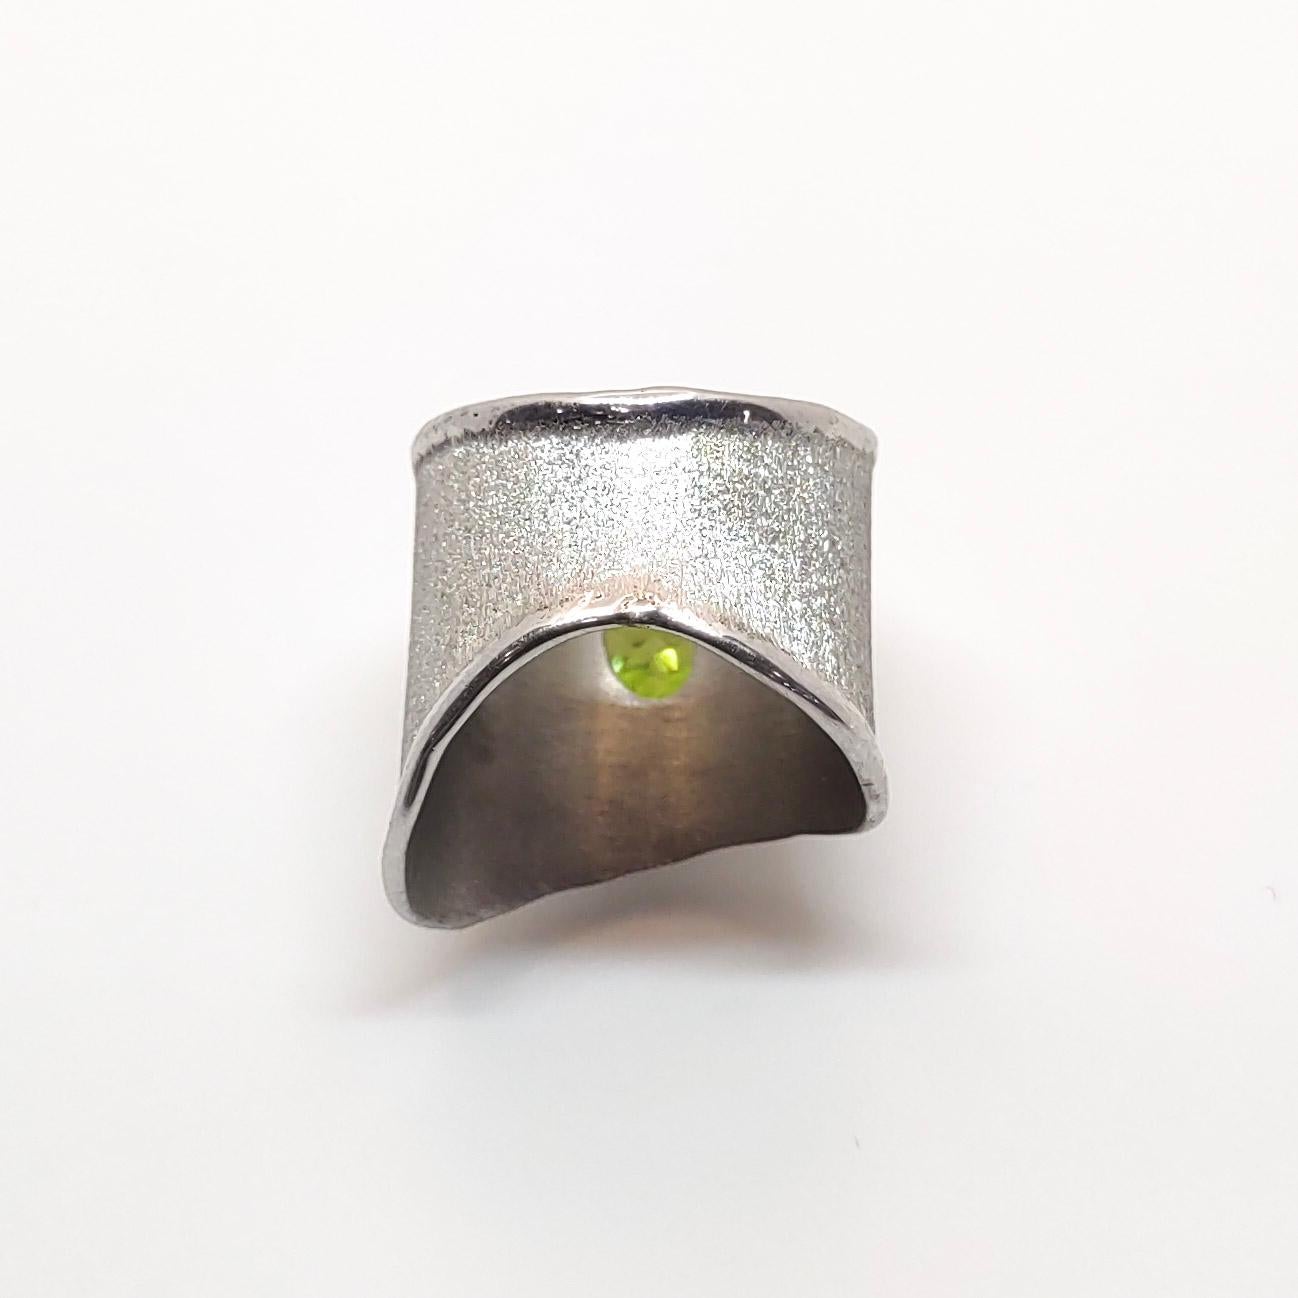 Yianni Creations Peridot Ring in Fine Silver and Palladium For Sale 3